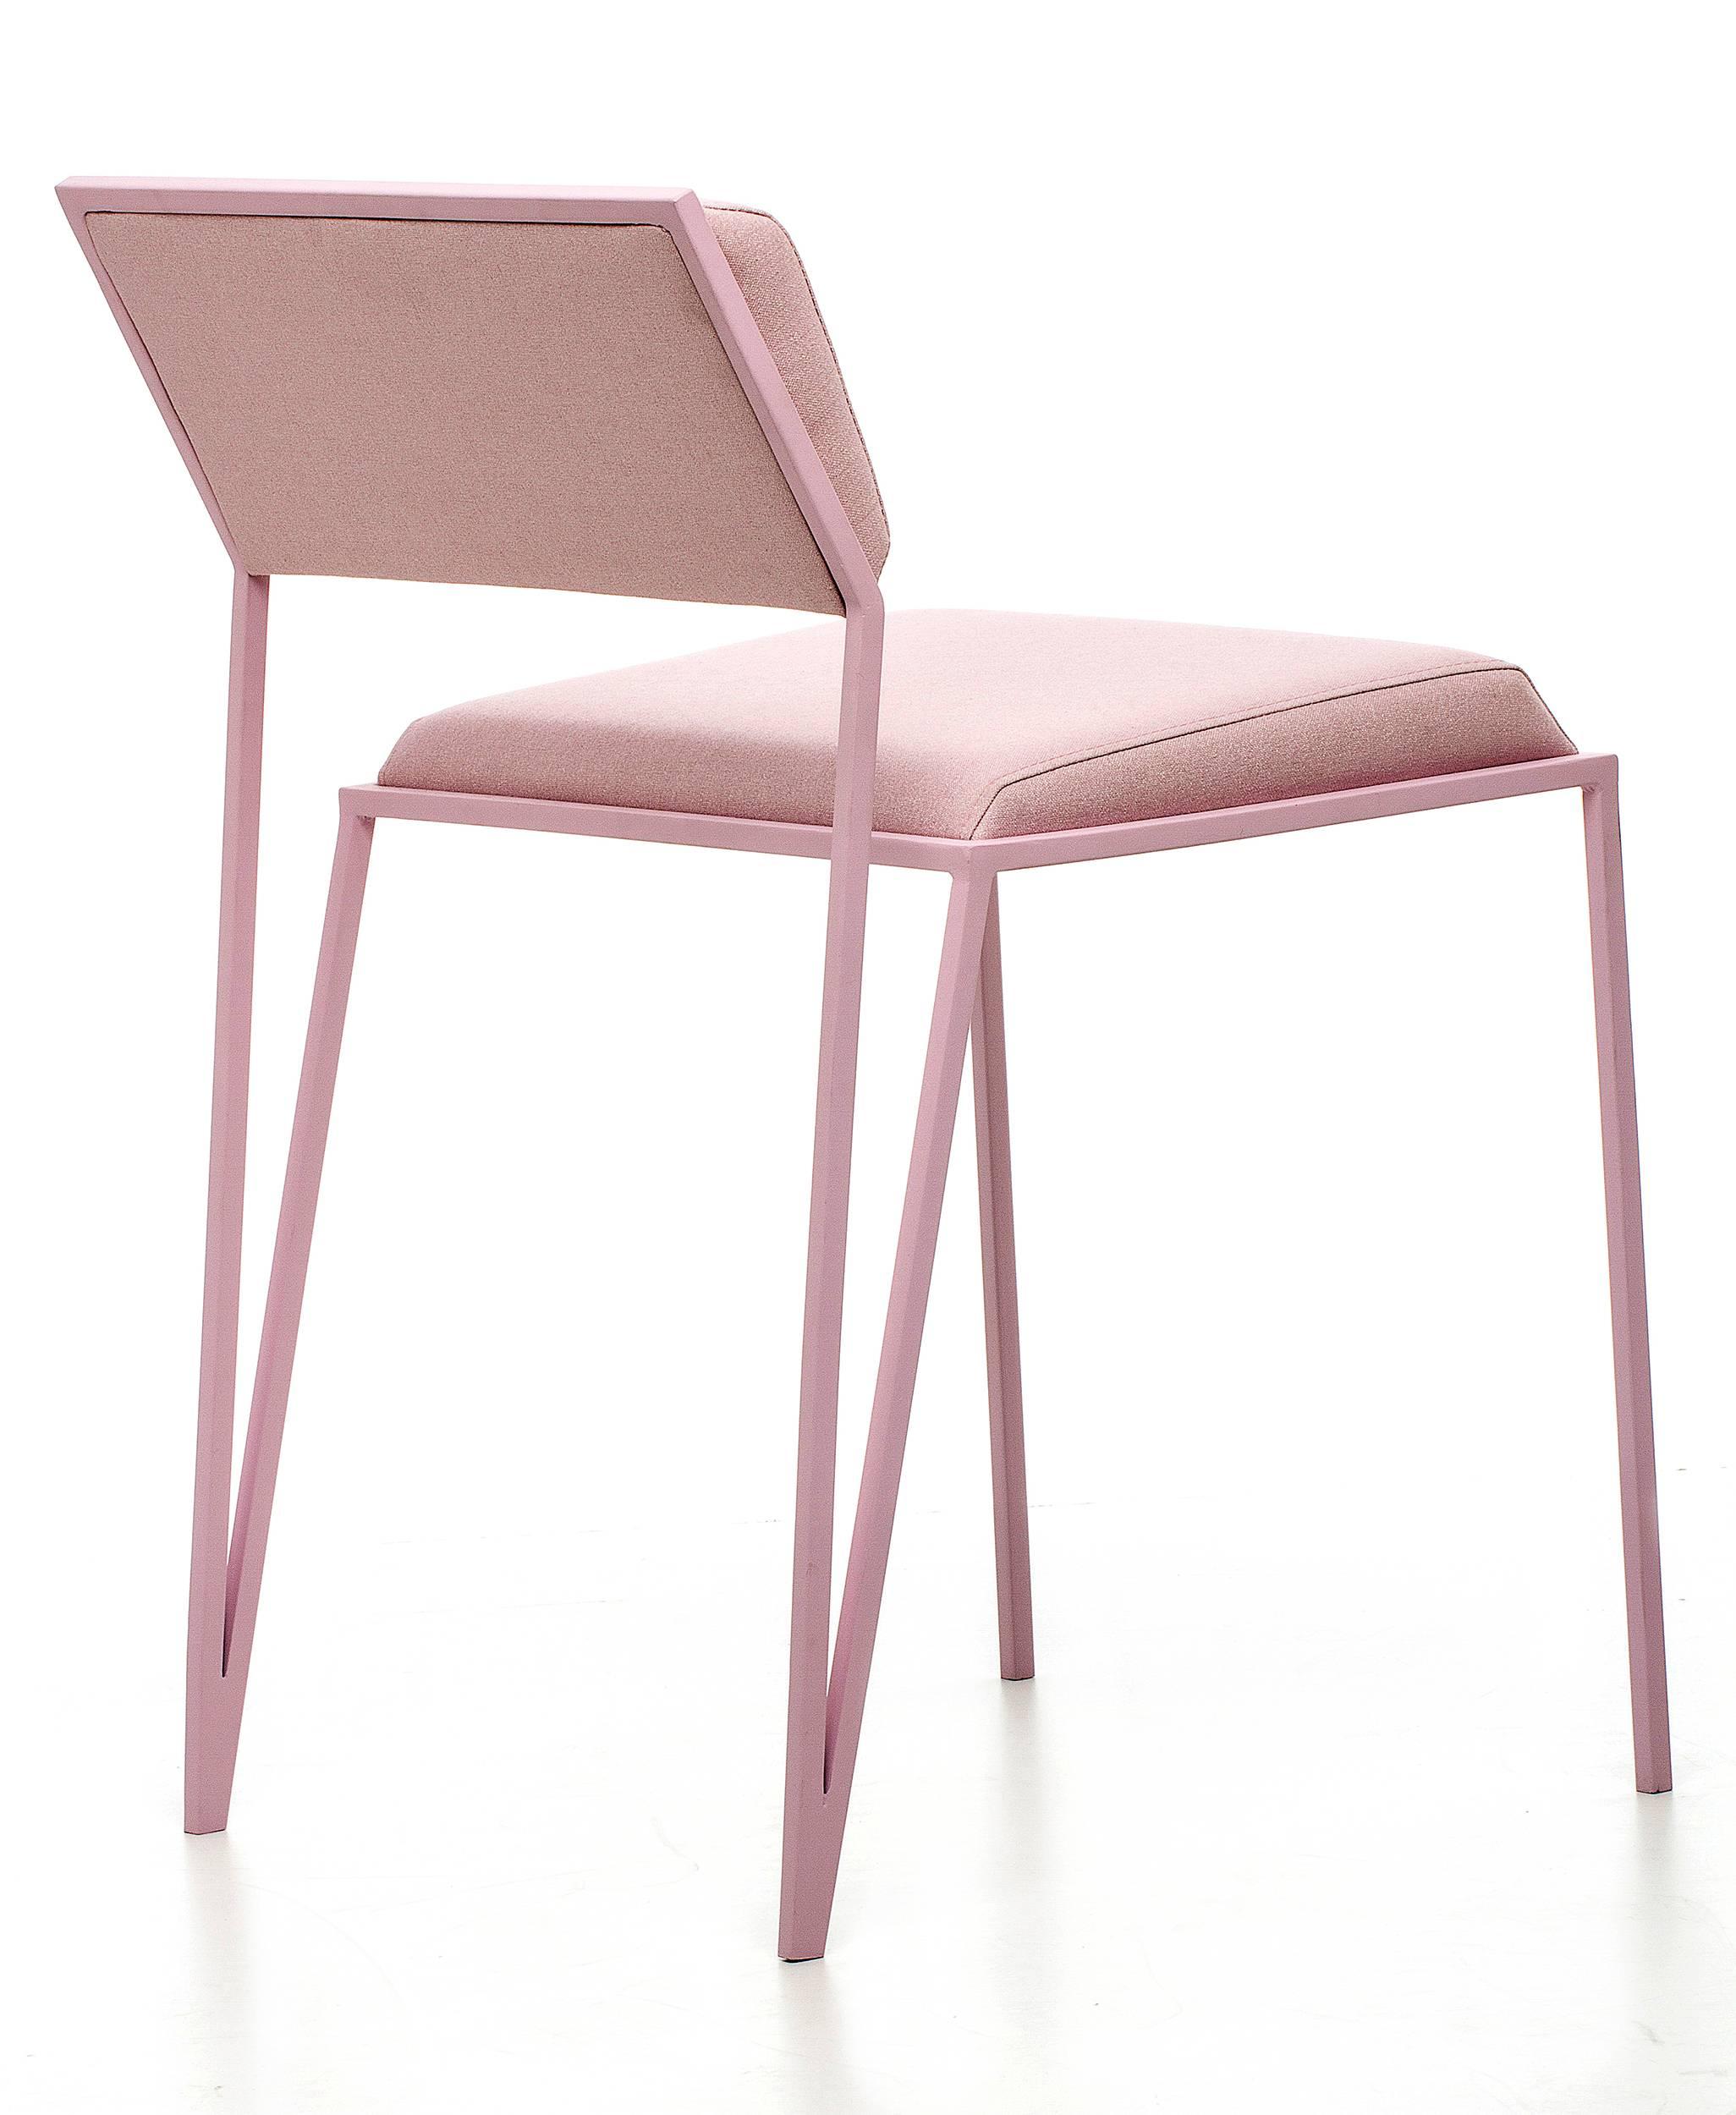 Painted Minimalist Chair in Steel, Brazilian Contemporary Design by Tiago Curioni